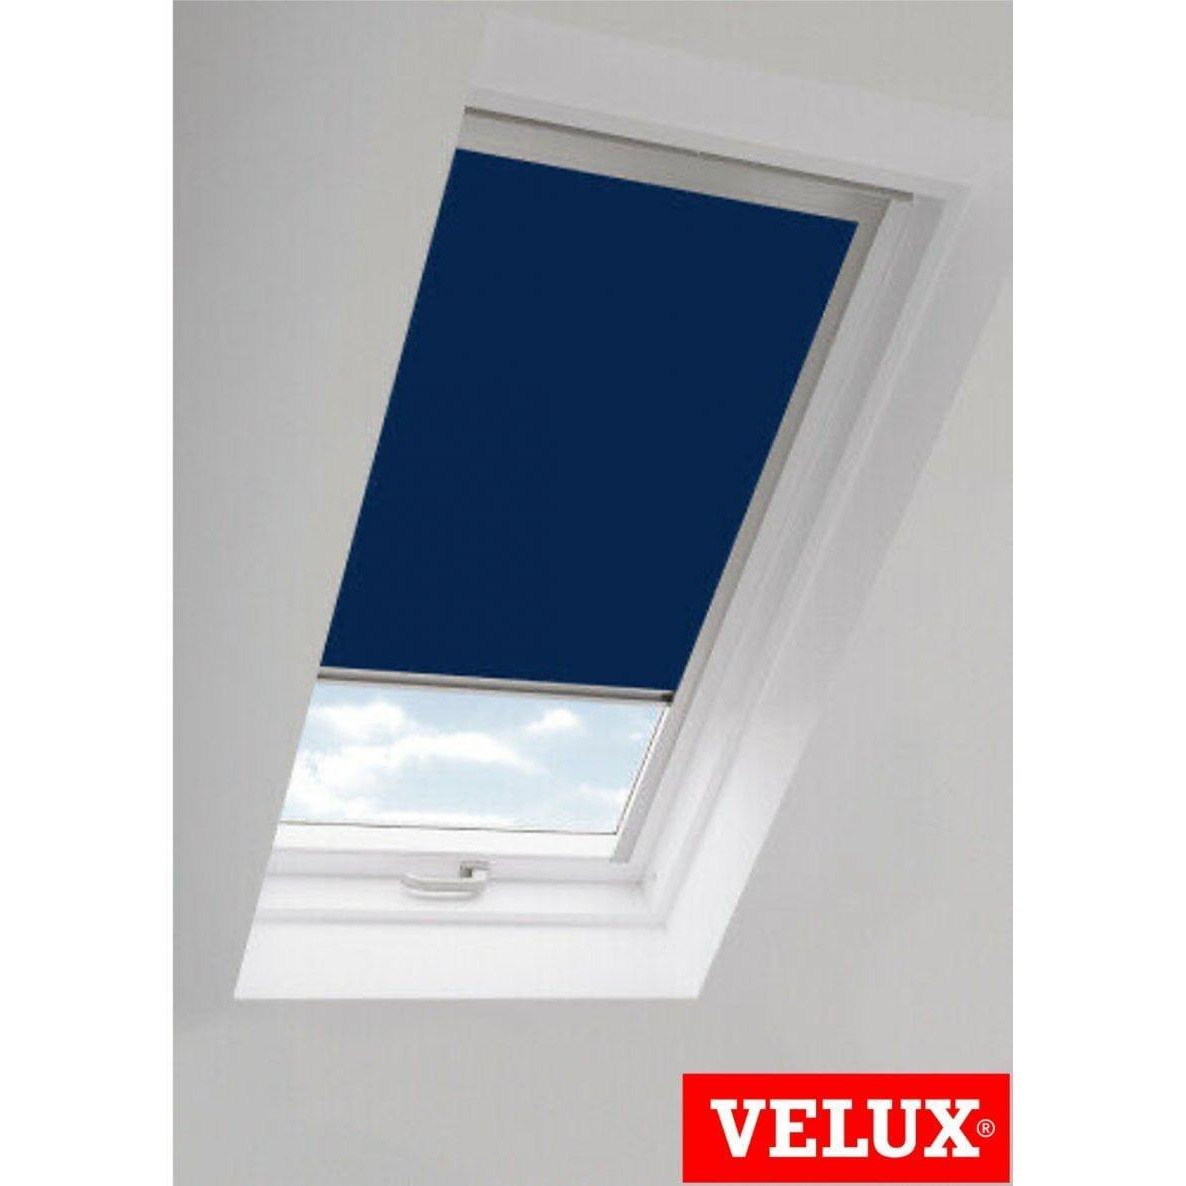 Aruba Blue Thermal out Skylight Roller Blinds (Velux Roof Windows G Codes) - image 1